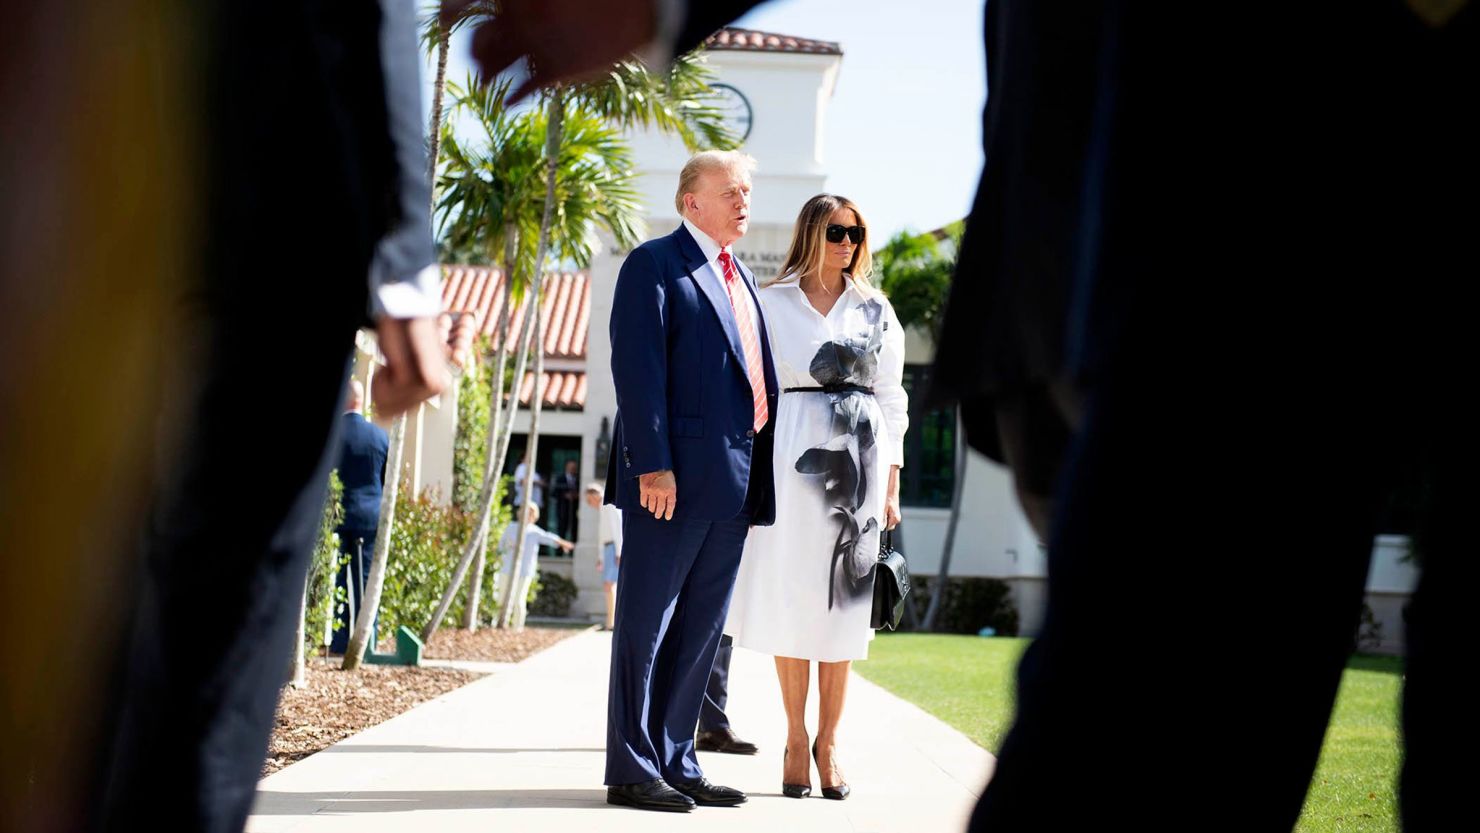 Donald and Melania Trump stand in front of members of the media after casting their votes at the Morton and Barbara Mandel Recreation Center on March 19, in Palm Beach, Florida.